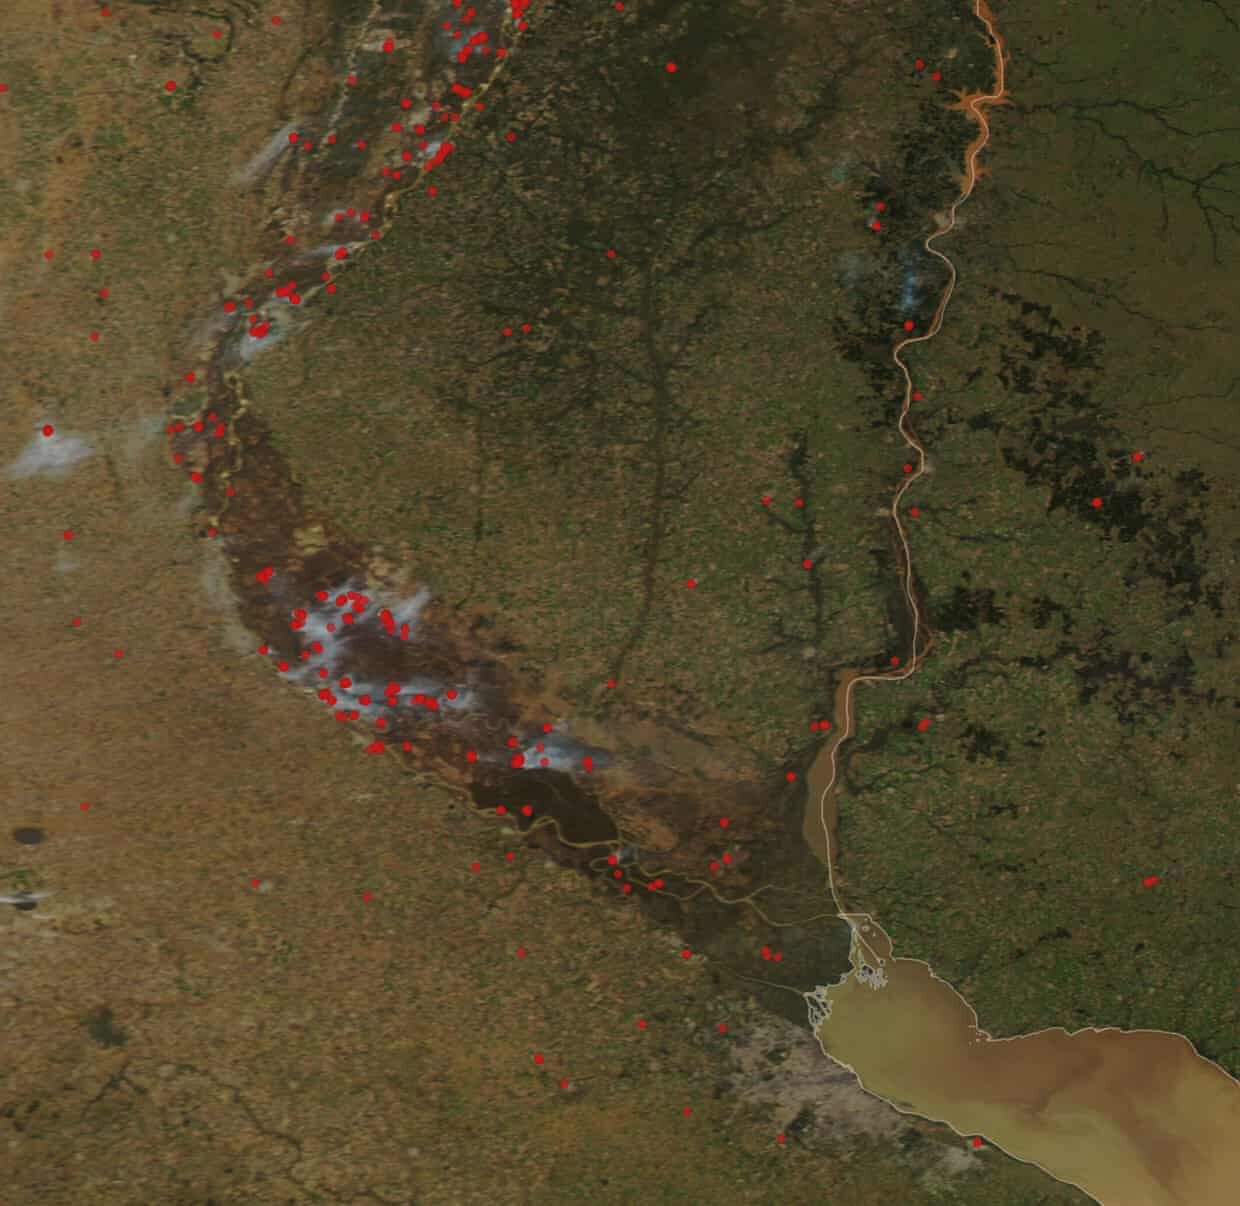 Satellite-detected hot spots in the delta have